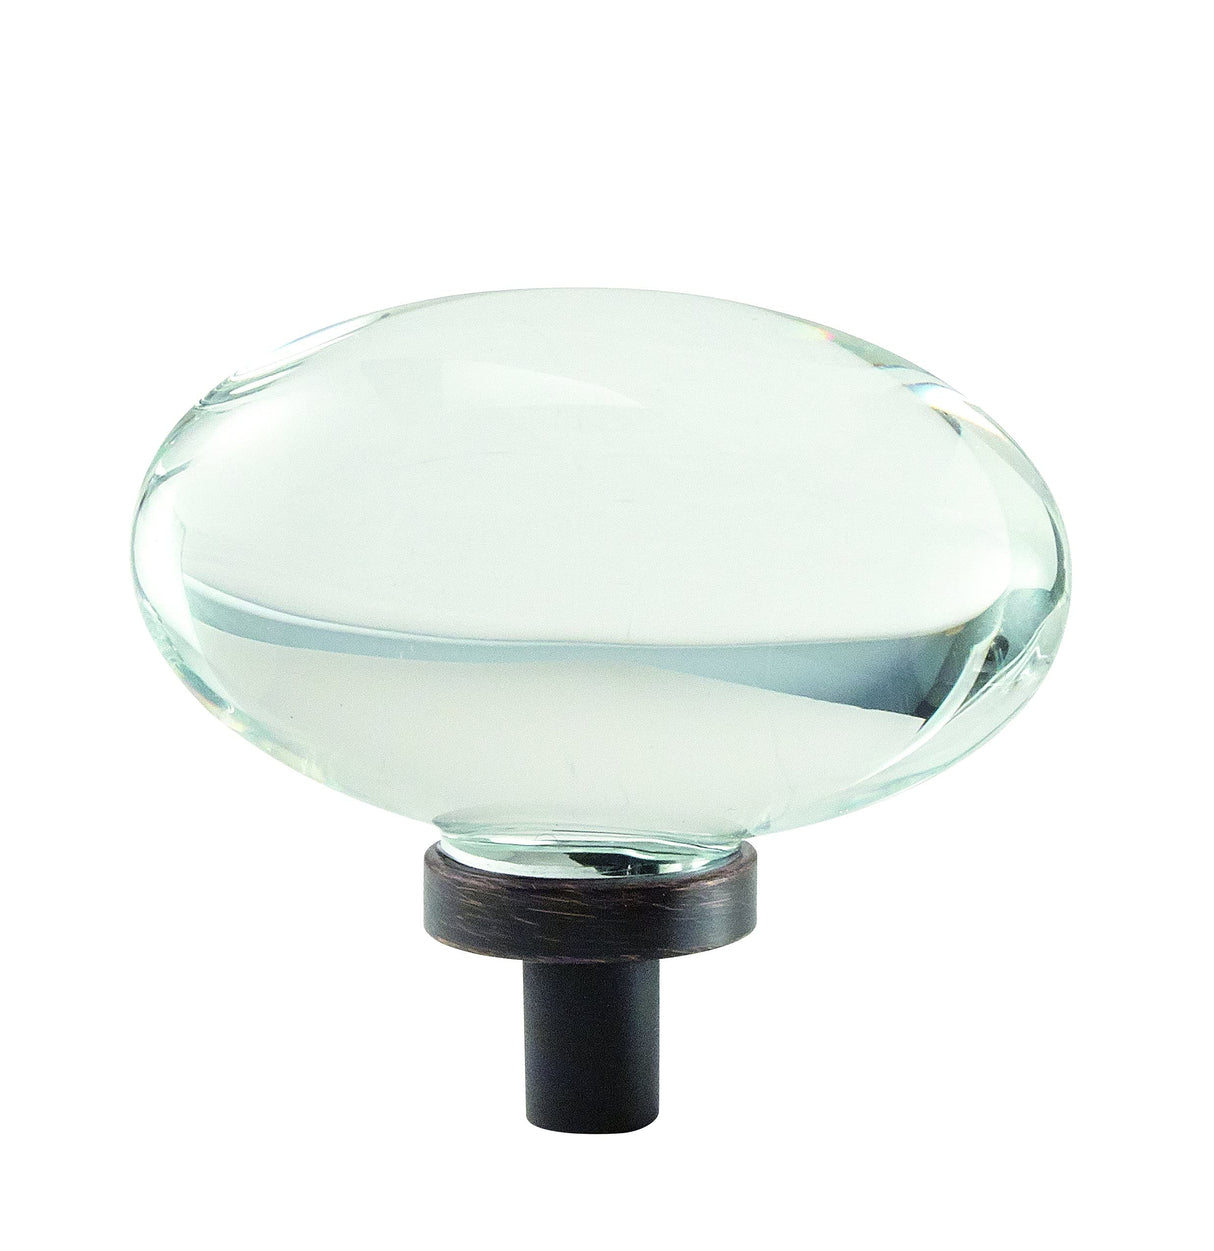 Amerock Cabinet Knob Clear/Oil-Rubbed Bronze 1-3/4 inch (44 mm) Length Glacio 1 Pack Drawer Knob Cabinet Hardware